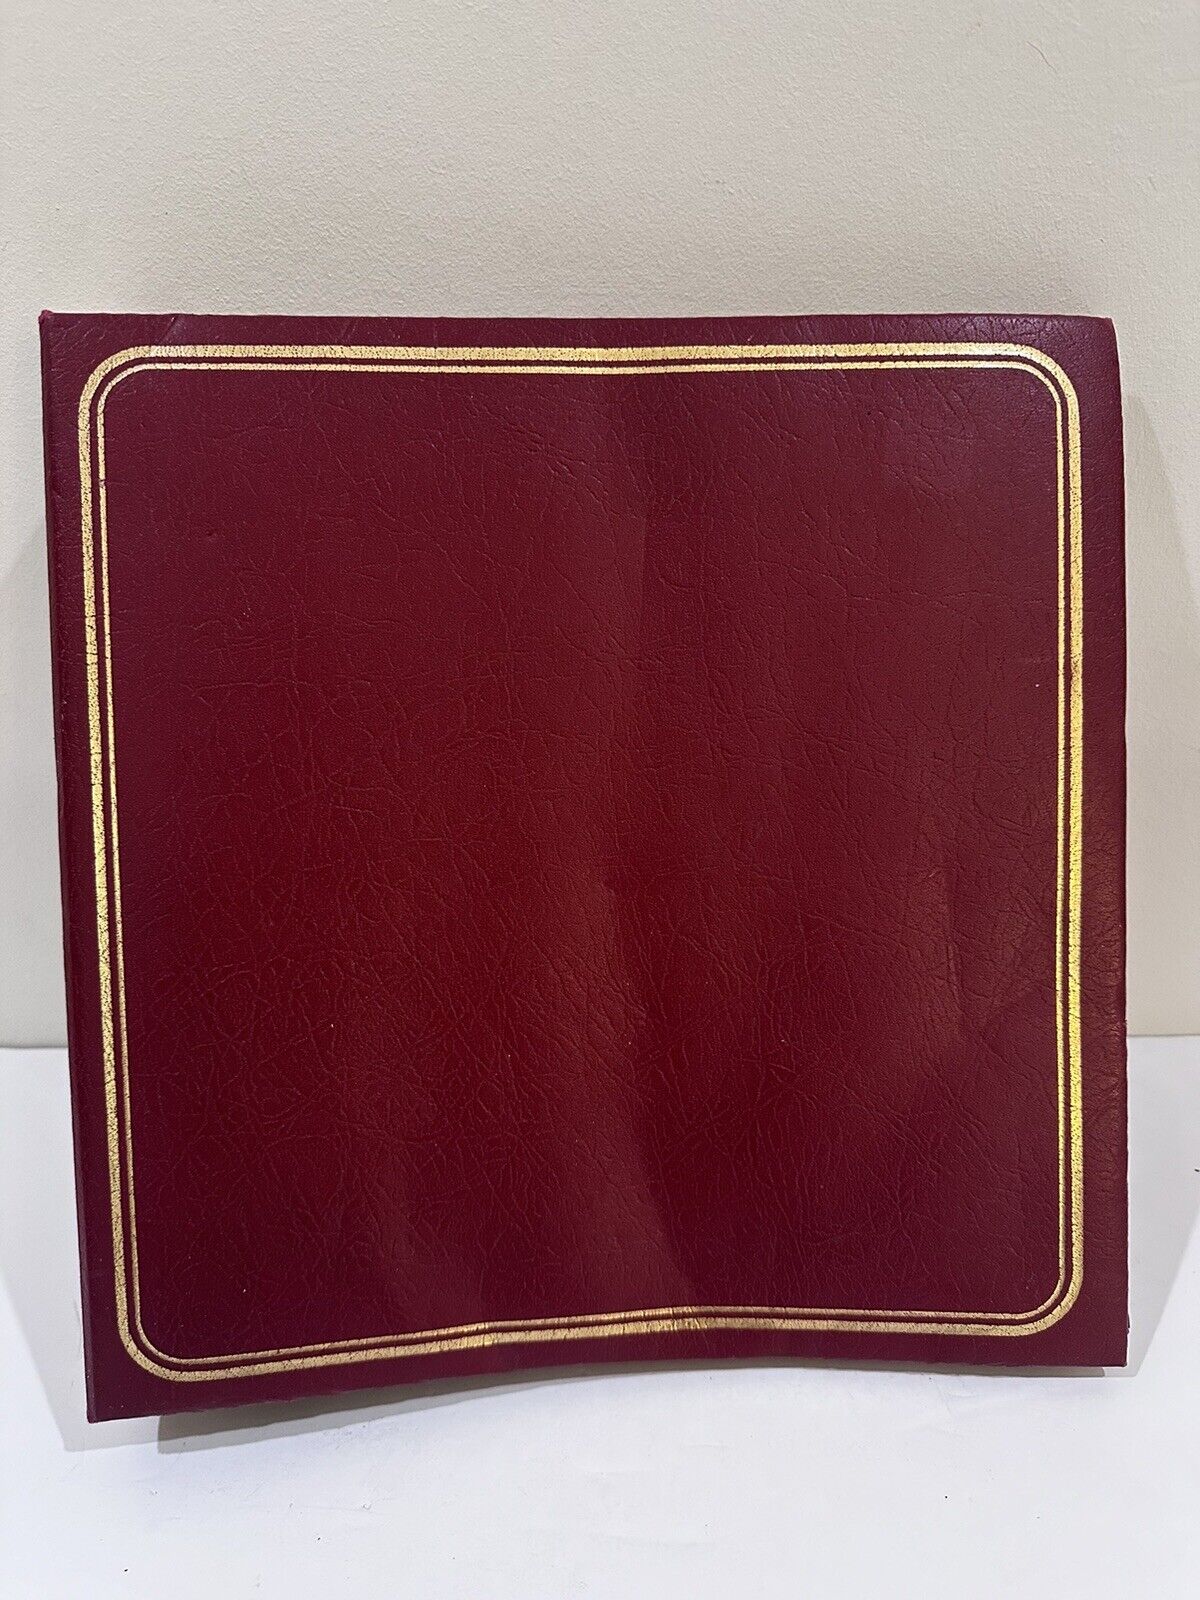 New Red Vintage Leather Picture Photo Album 62 Pages 10 Pictures PP 620 Photos